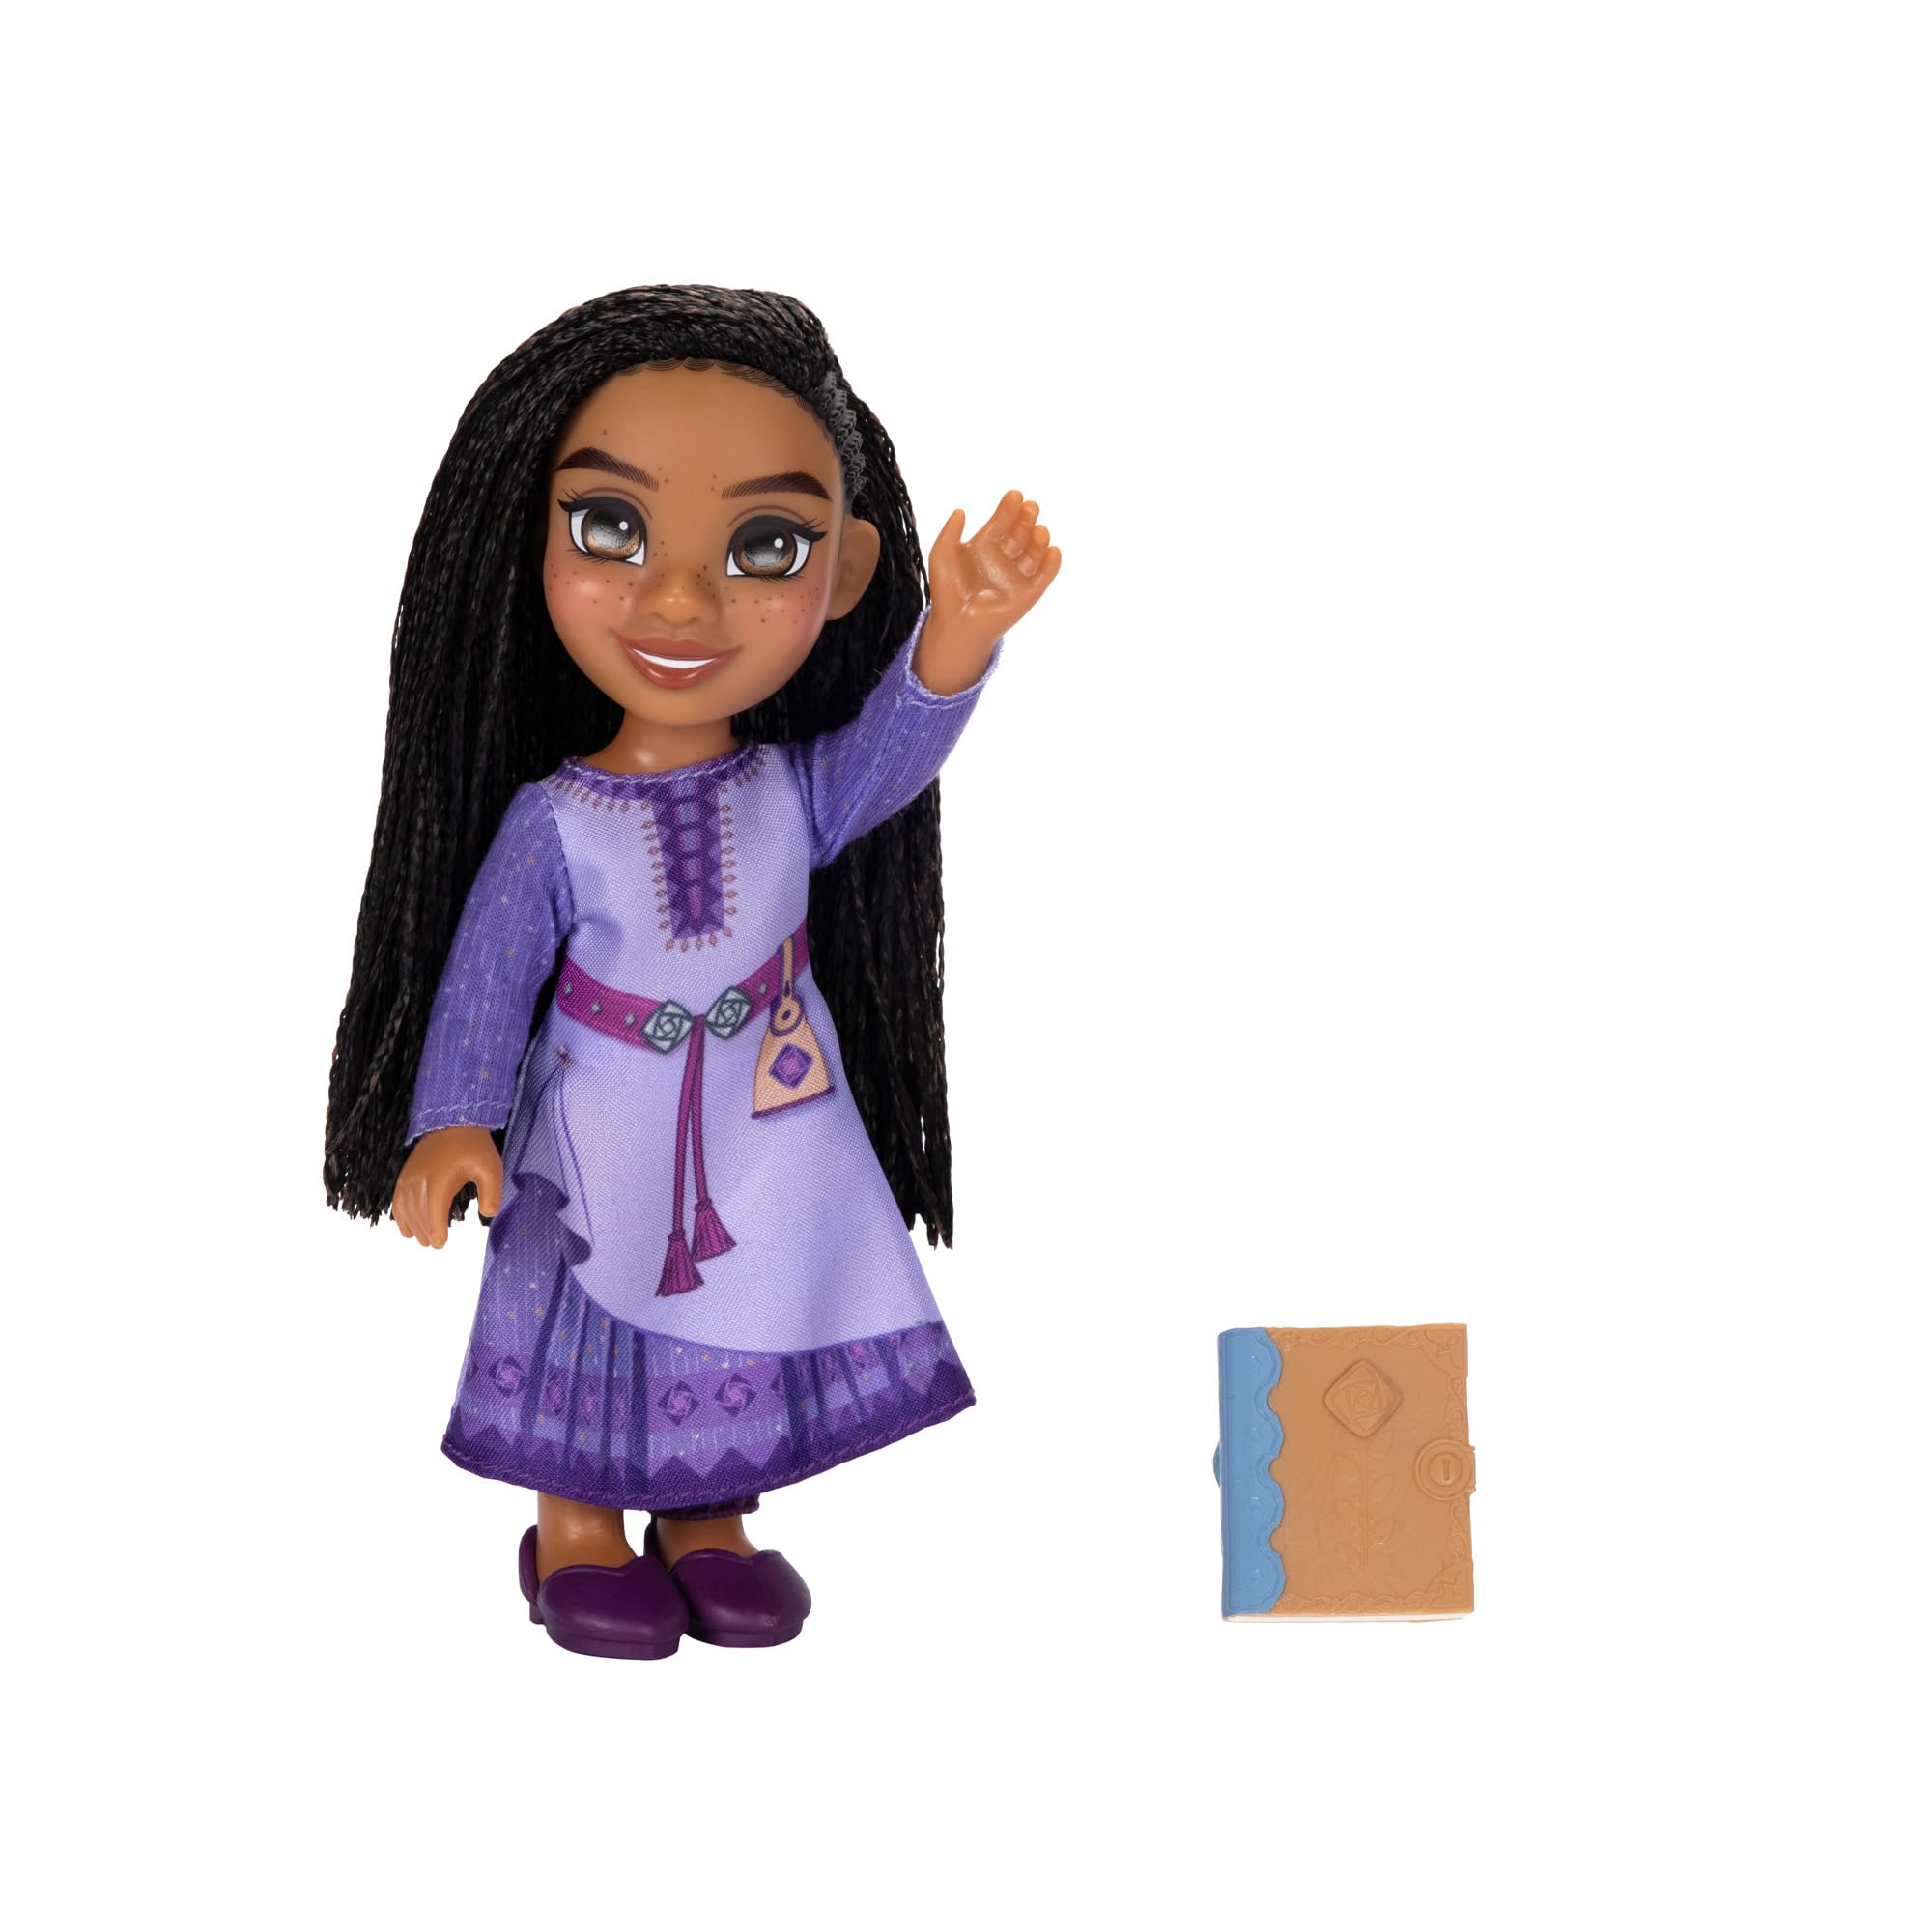 Disney Asha Petite Doll 6 Inches Tall, Pocket Size with Authentic Movie Fashions